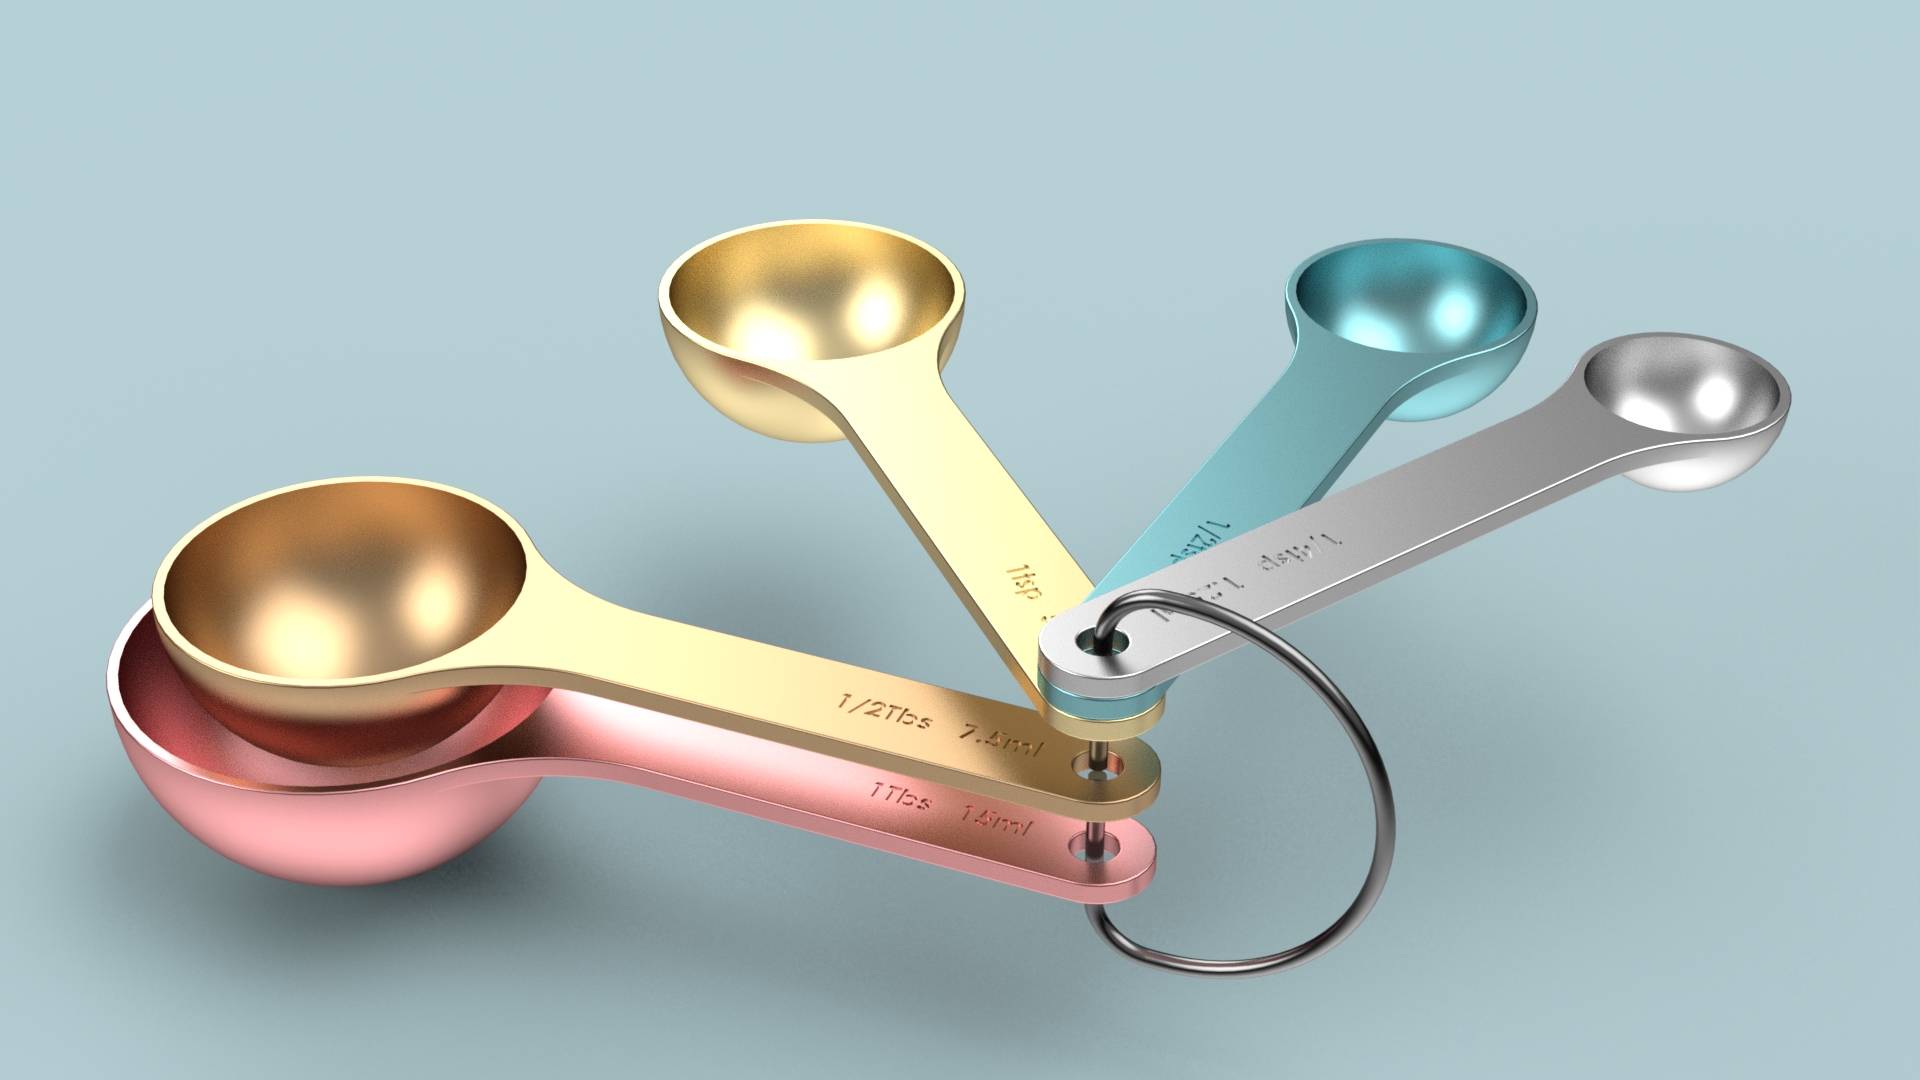 What Are The Five Sizes Of Measuring Spoons